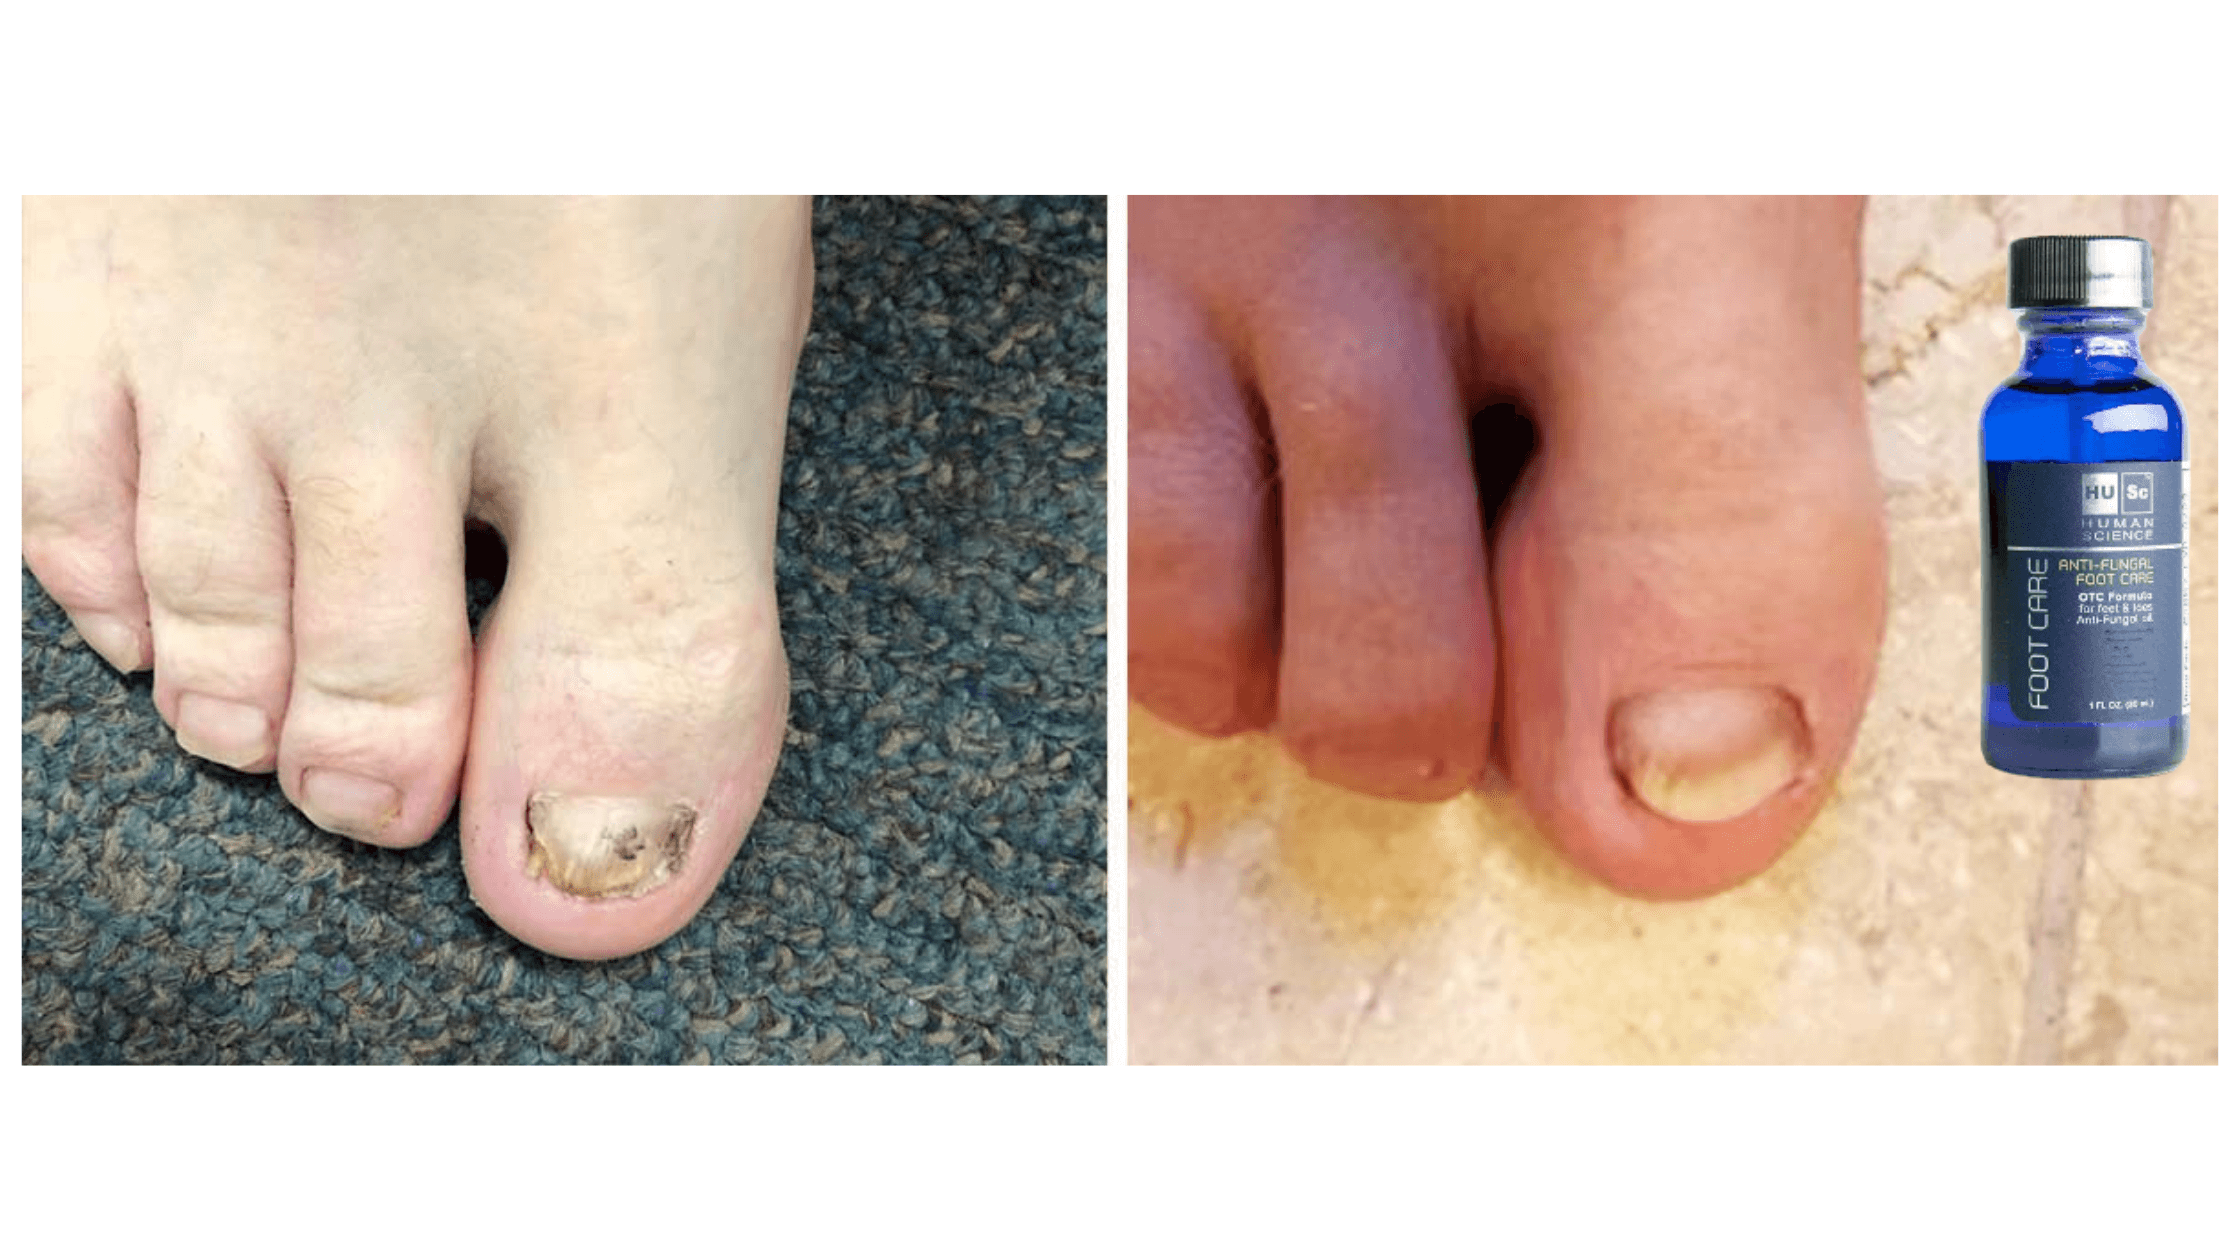 Human Science Antifungal Foot Care Oil Results